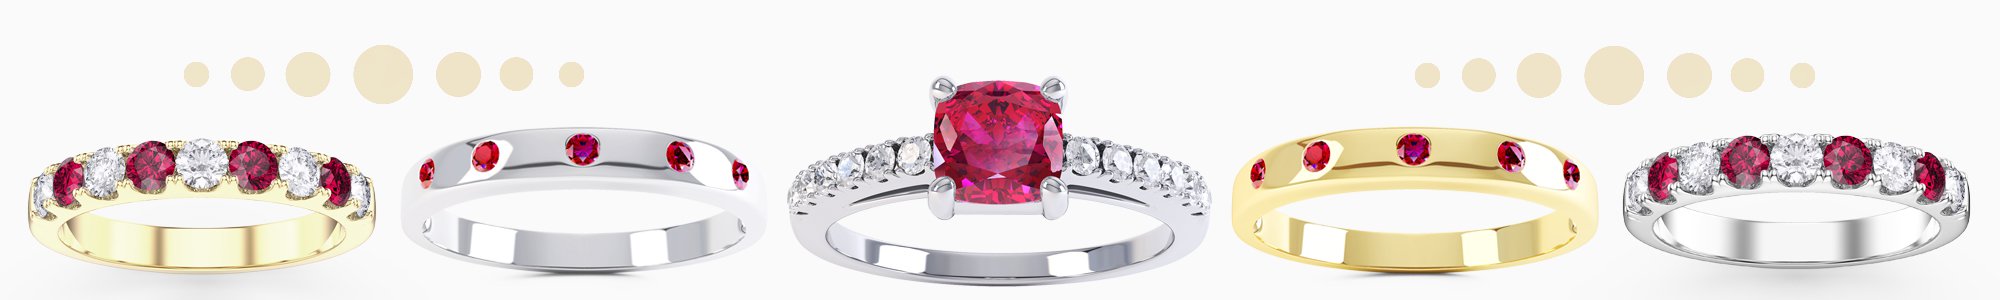 Shop Ruby Rings by Jian London. Buy direct and save from our wide selection of Ruby Rings at the Jian London jewellery Store. Free UK Delivery